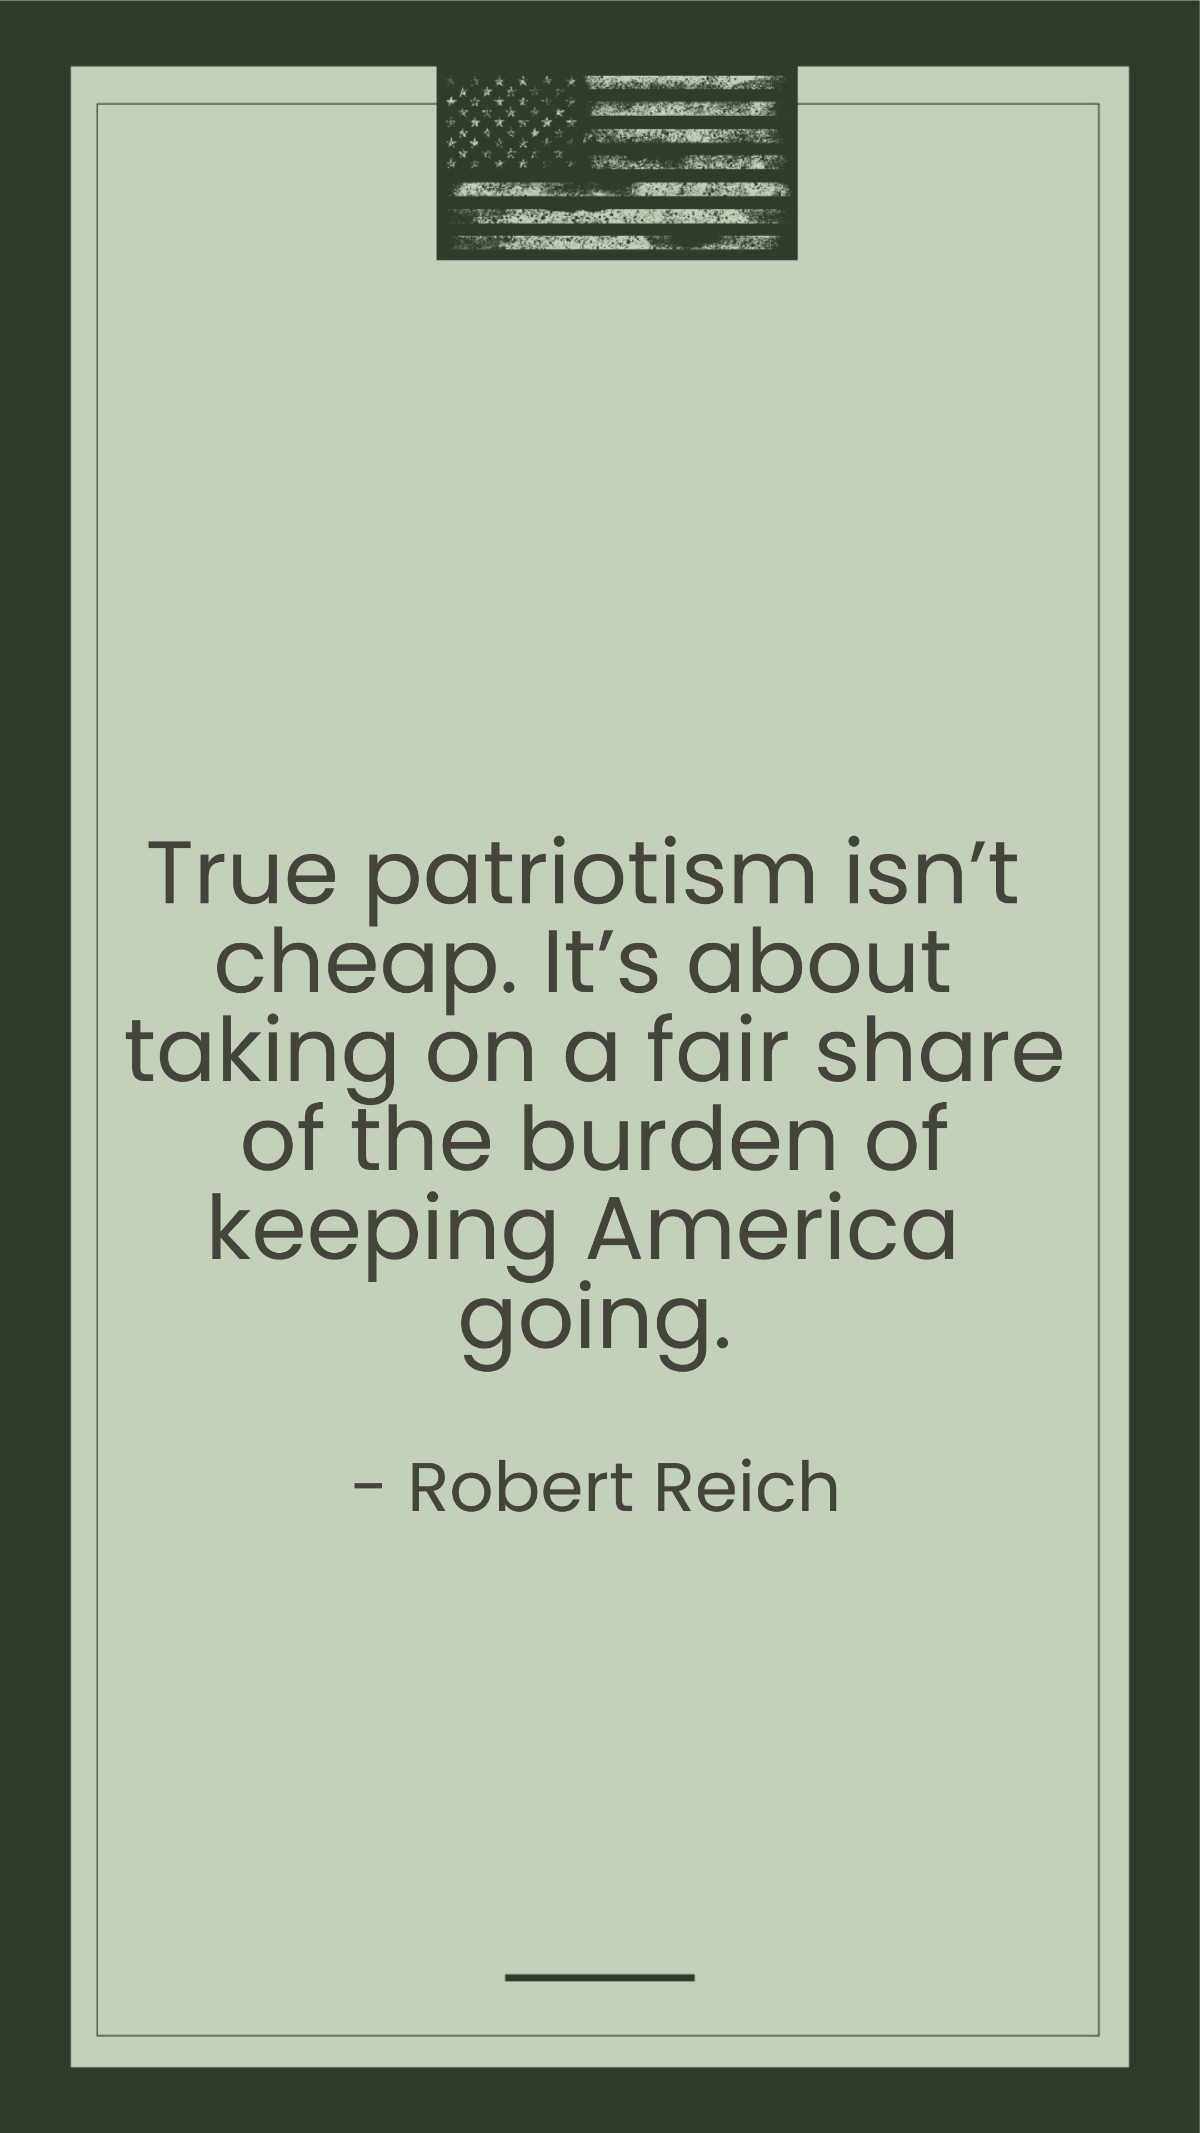 Robert Reich - True patriotism isn't cheap. It's about taking on a fair share of the burden of keeping America going. Template